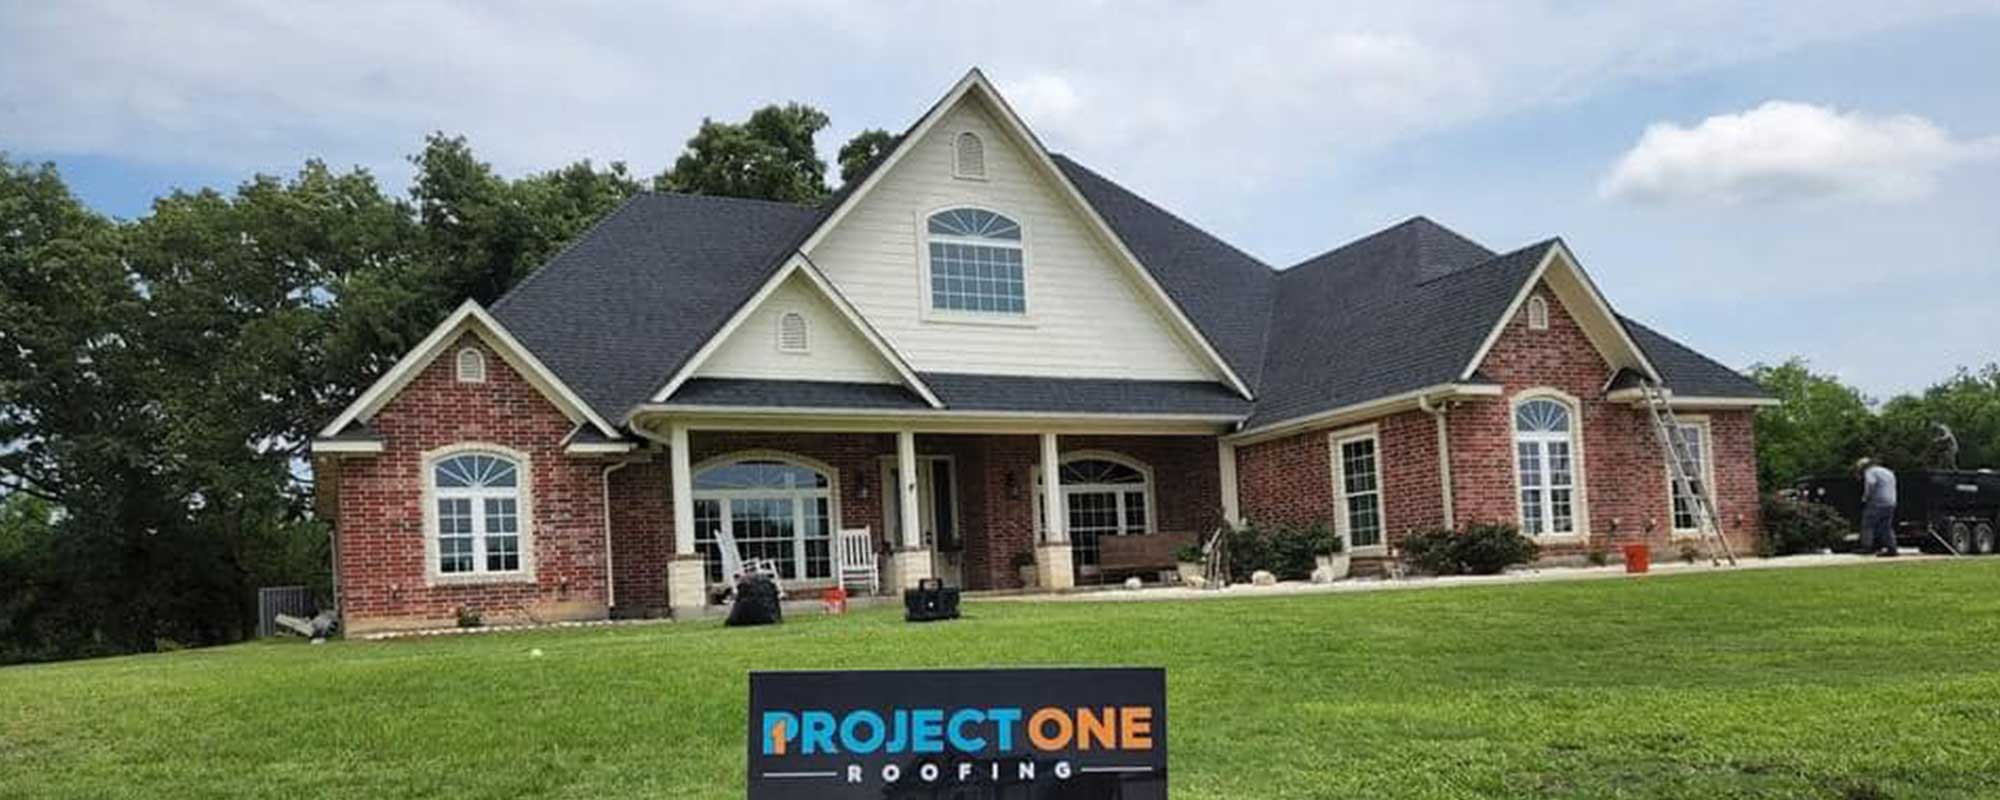 Project One®Roofing Top Roofing Contractors